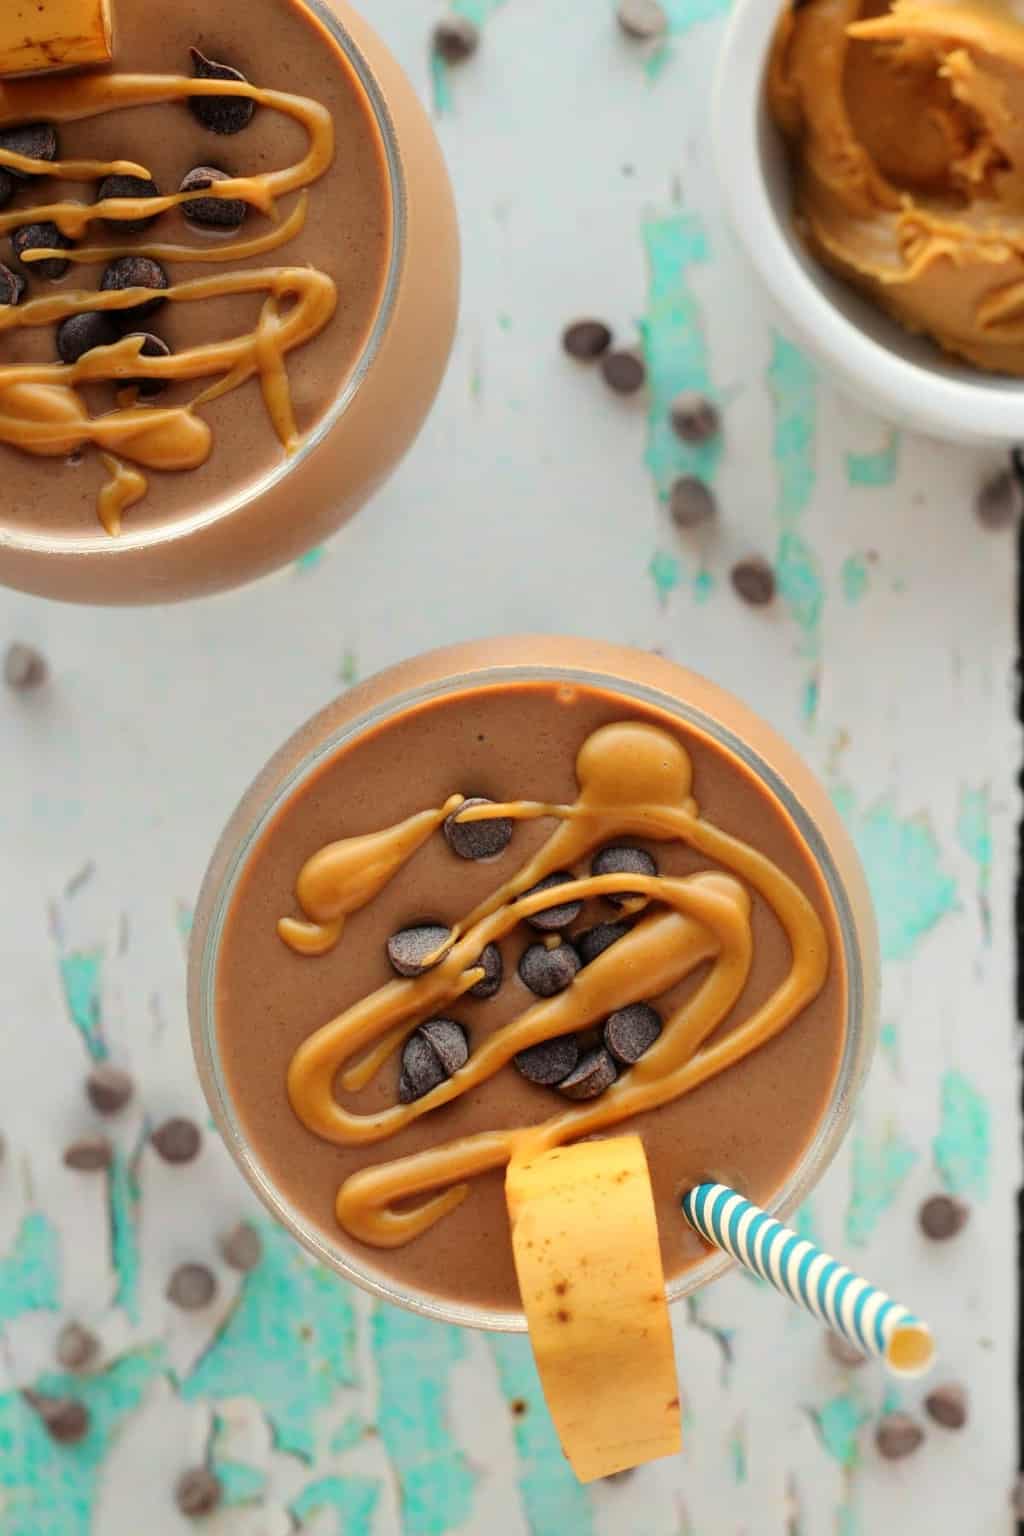 Chocolate peanut butter smoothie topped with chocolate chips and drizzled peanut butter in glasses.